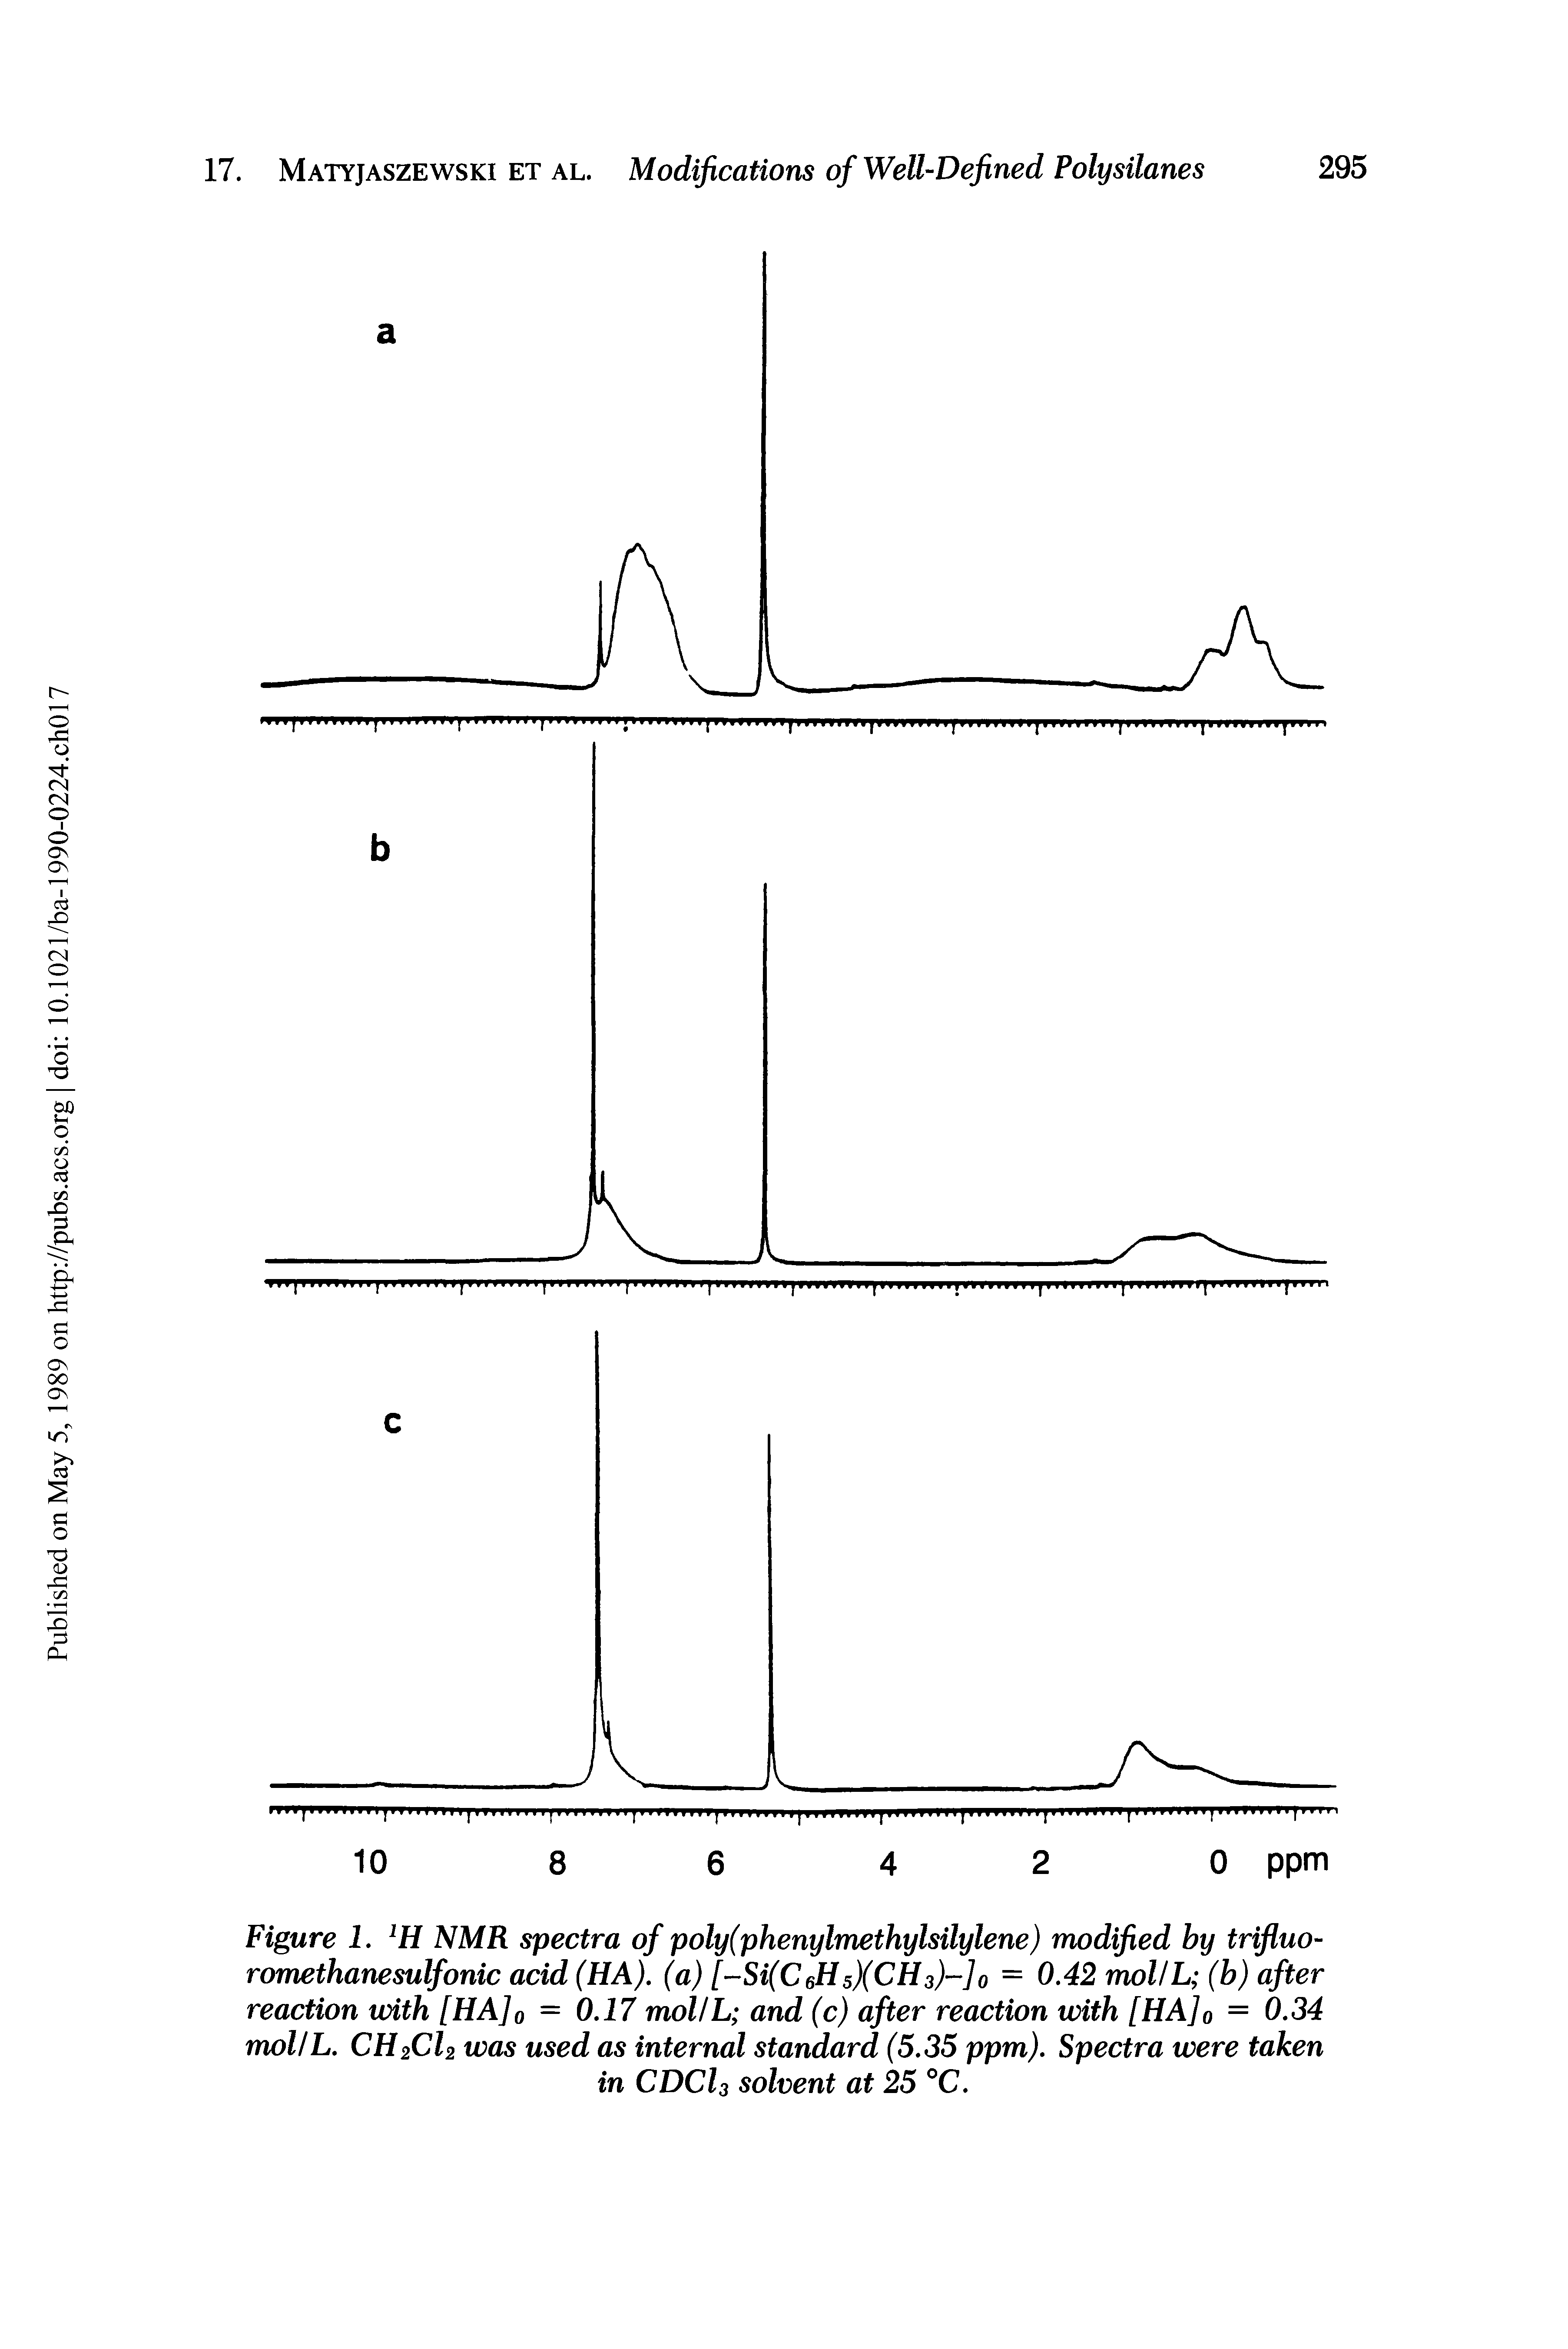 Figure 1. NMR spectra of poly(phenylmethylsilylene) modified by trifluo-romethanesulfonic acid (HA), (a) [Si(CeHs)(CH3)-]o = 0.42 molIL (b) after reaction with [HA]o = 0.17 molIL and (c) after reaction with [HA]o = 0.34 mollL. CH2CI2 was used as internal standard (5.35 ppm). Spectra were taken in CDCI3 solvent at 25 °C.